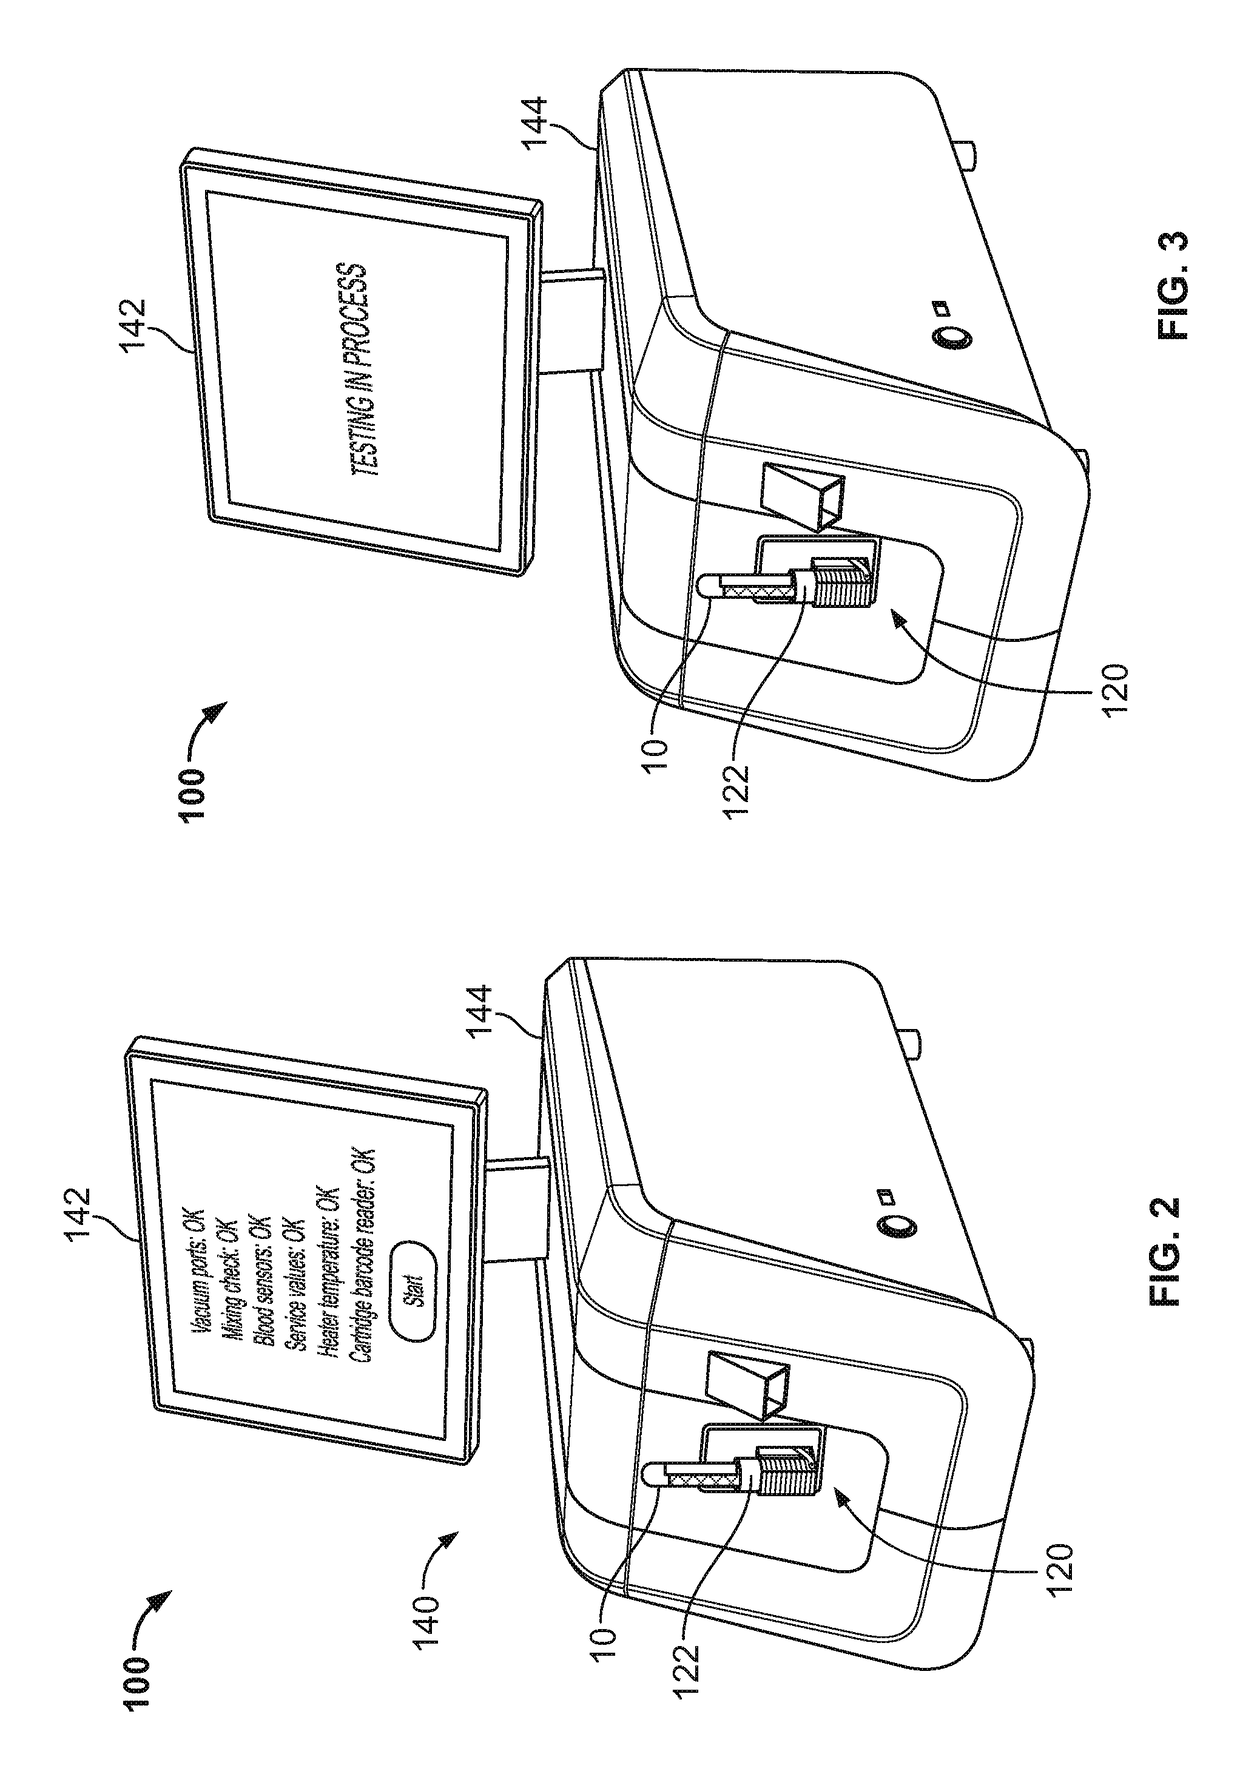 Blood testing system and method